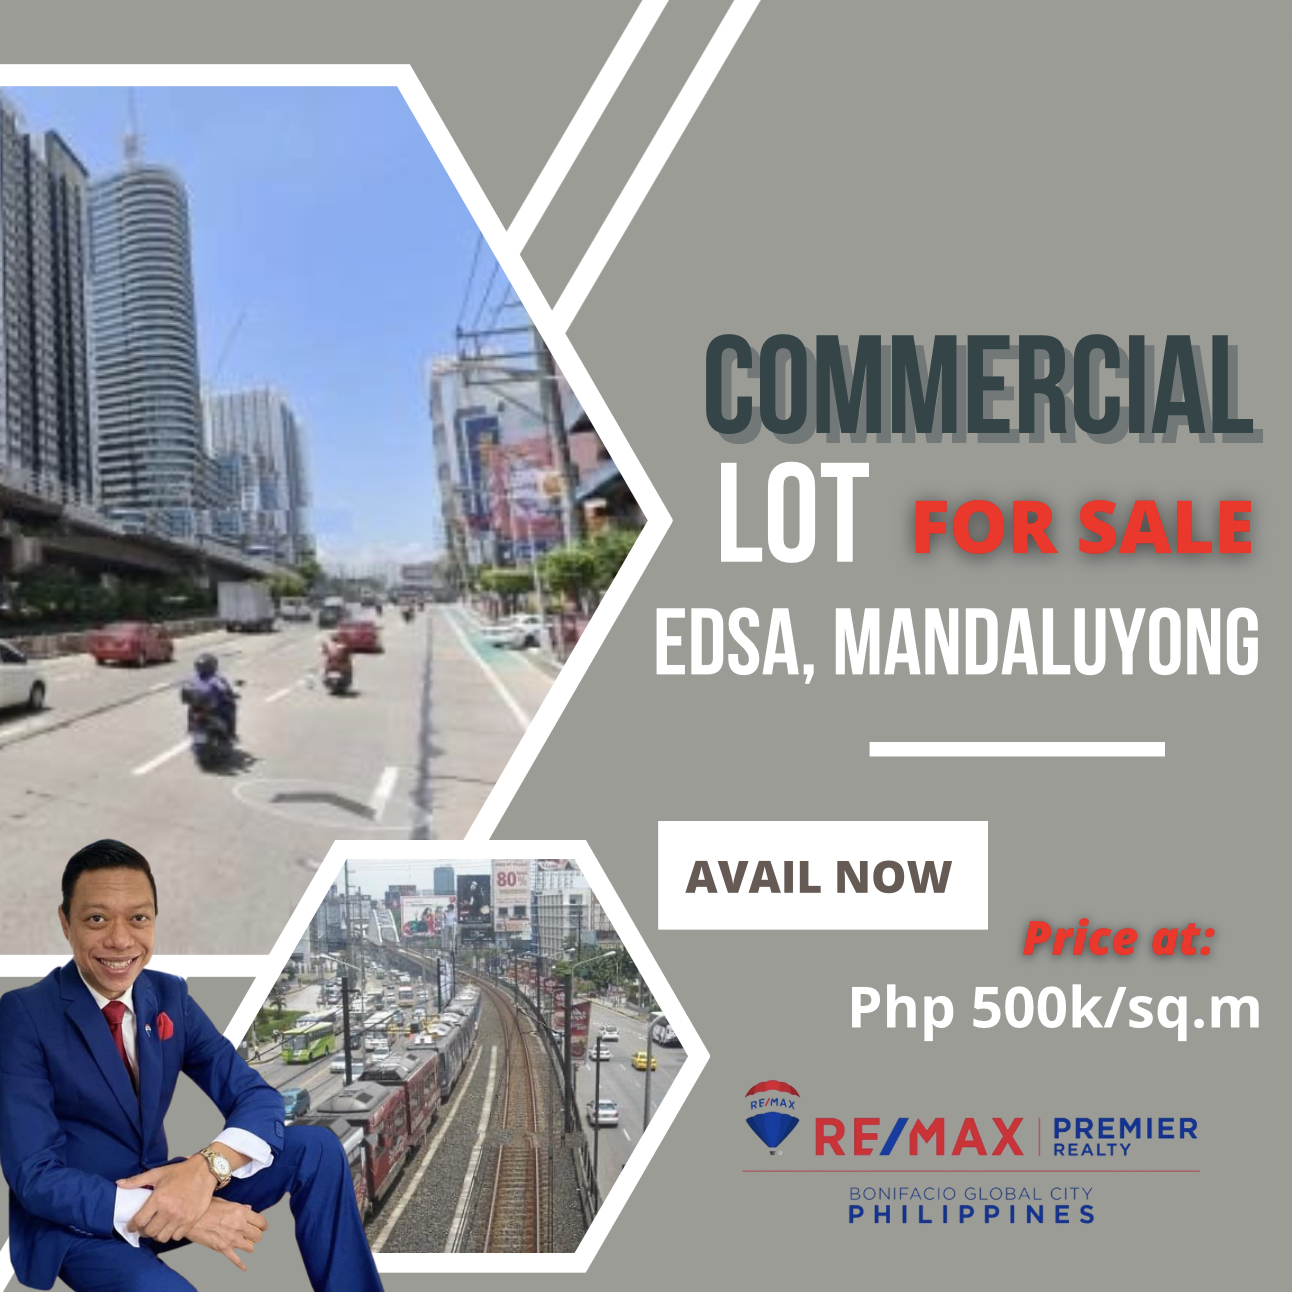 COMMERCIAL LOT FOR SALE in Edsa, Mandaluyong‼️